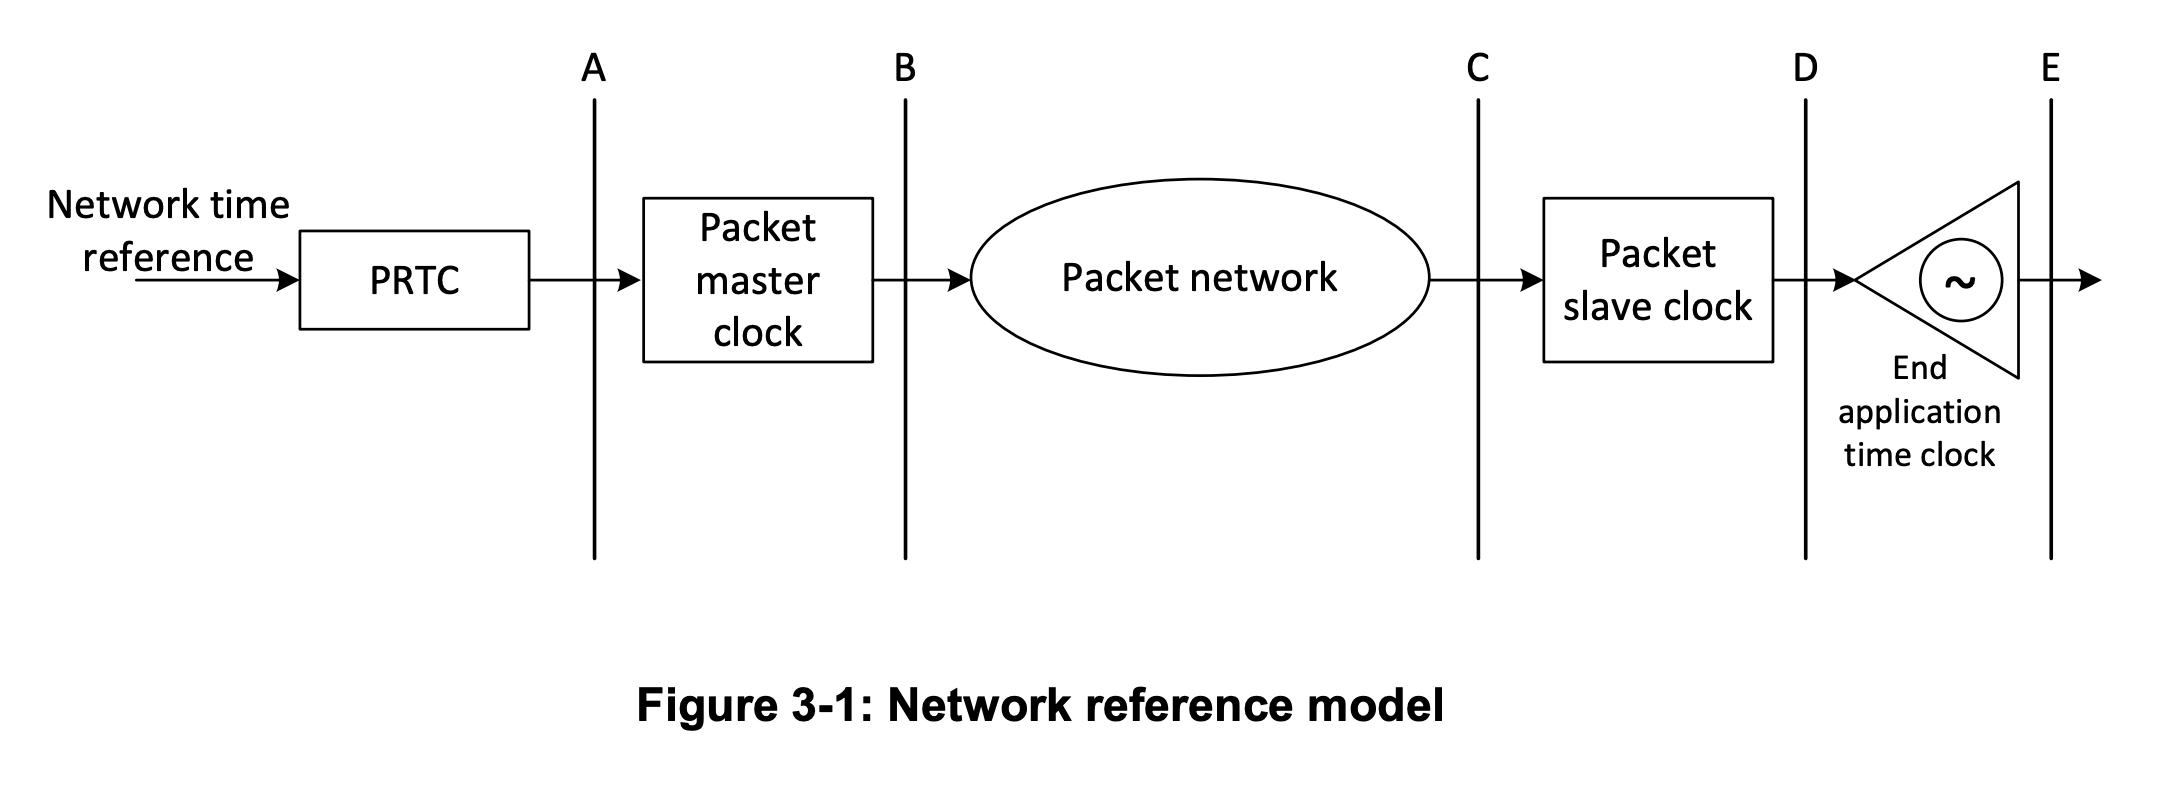 Figure 3-1 Network reference model